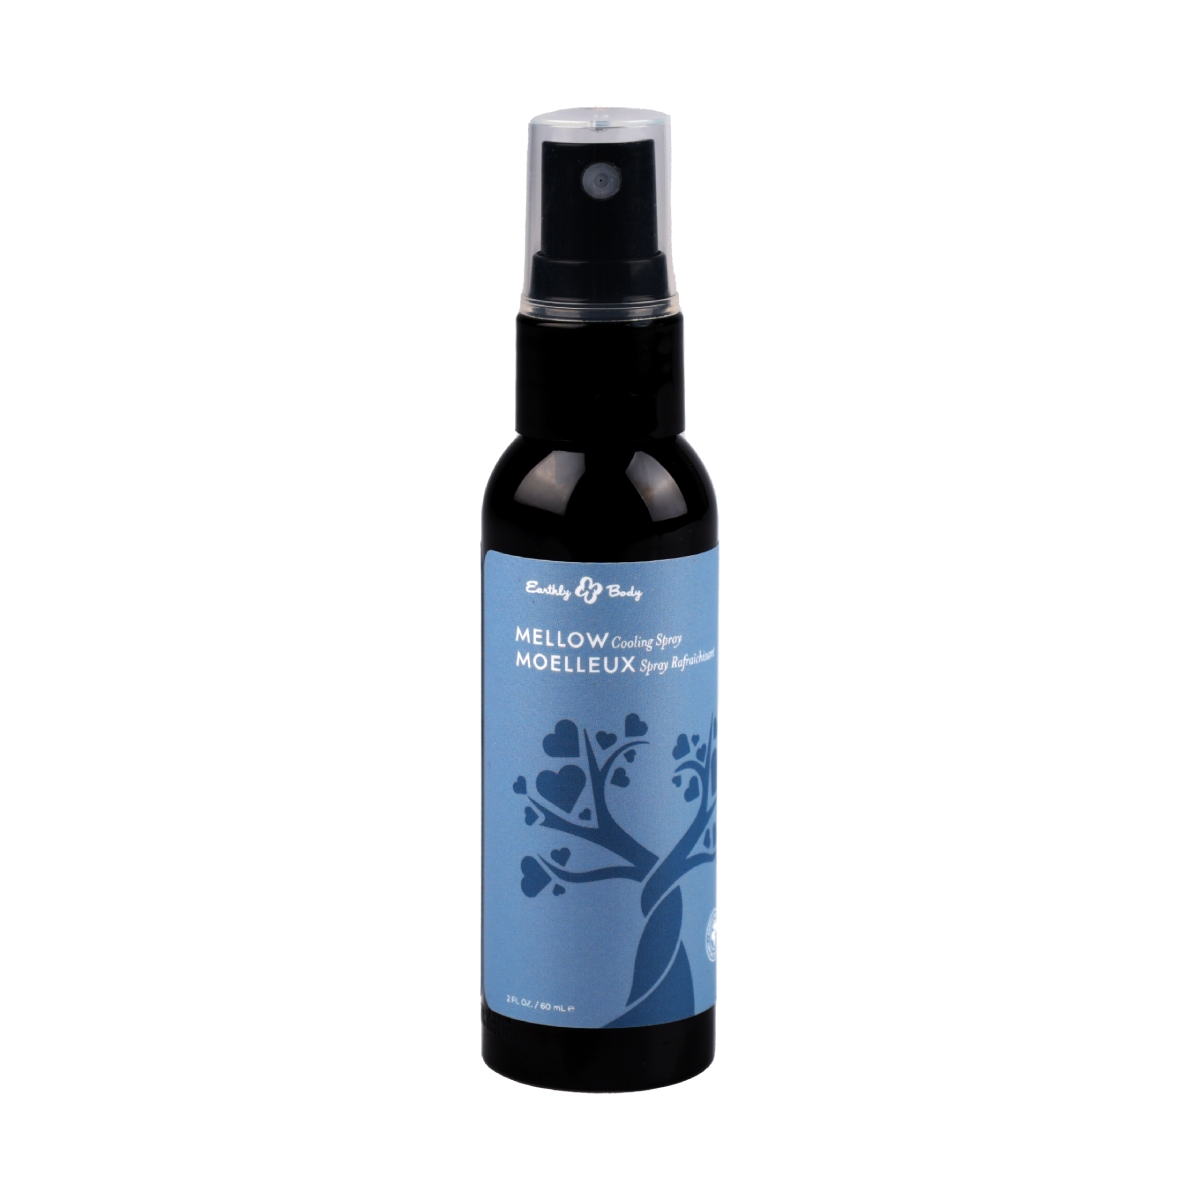 HEMP SEED BY NIGHT MELLOW- COOLING SPRAY 2 OZ - Click Image to Close